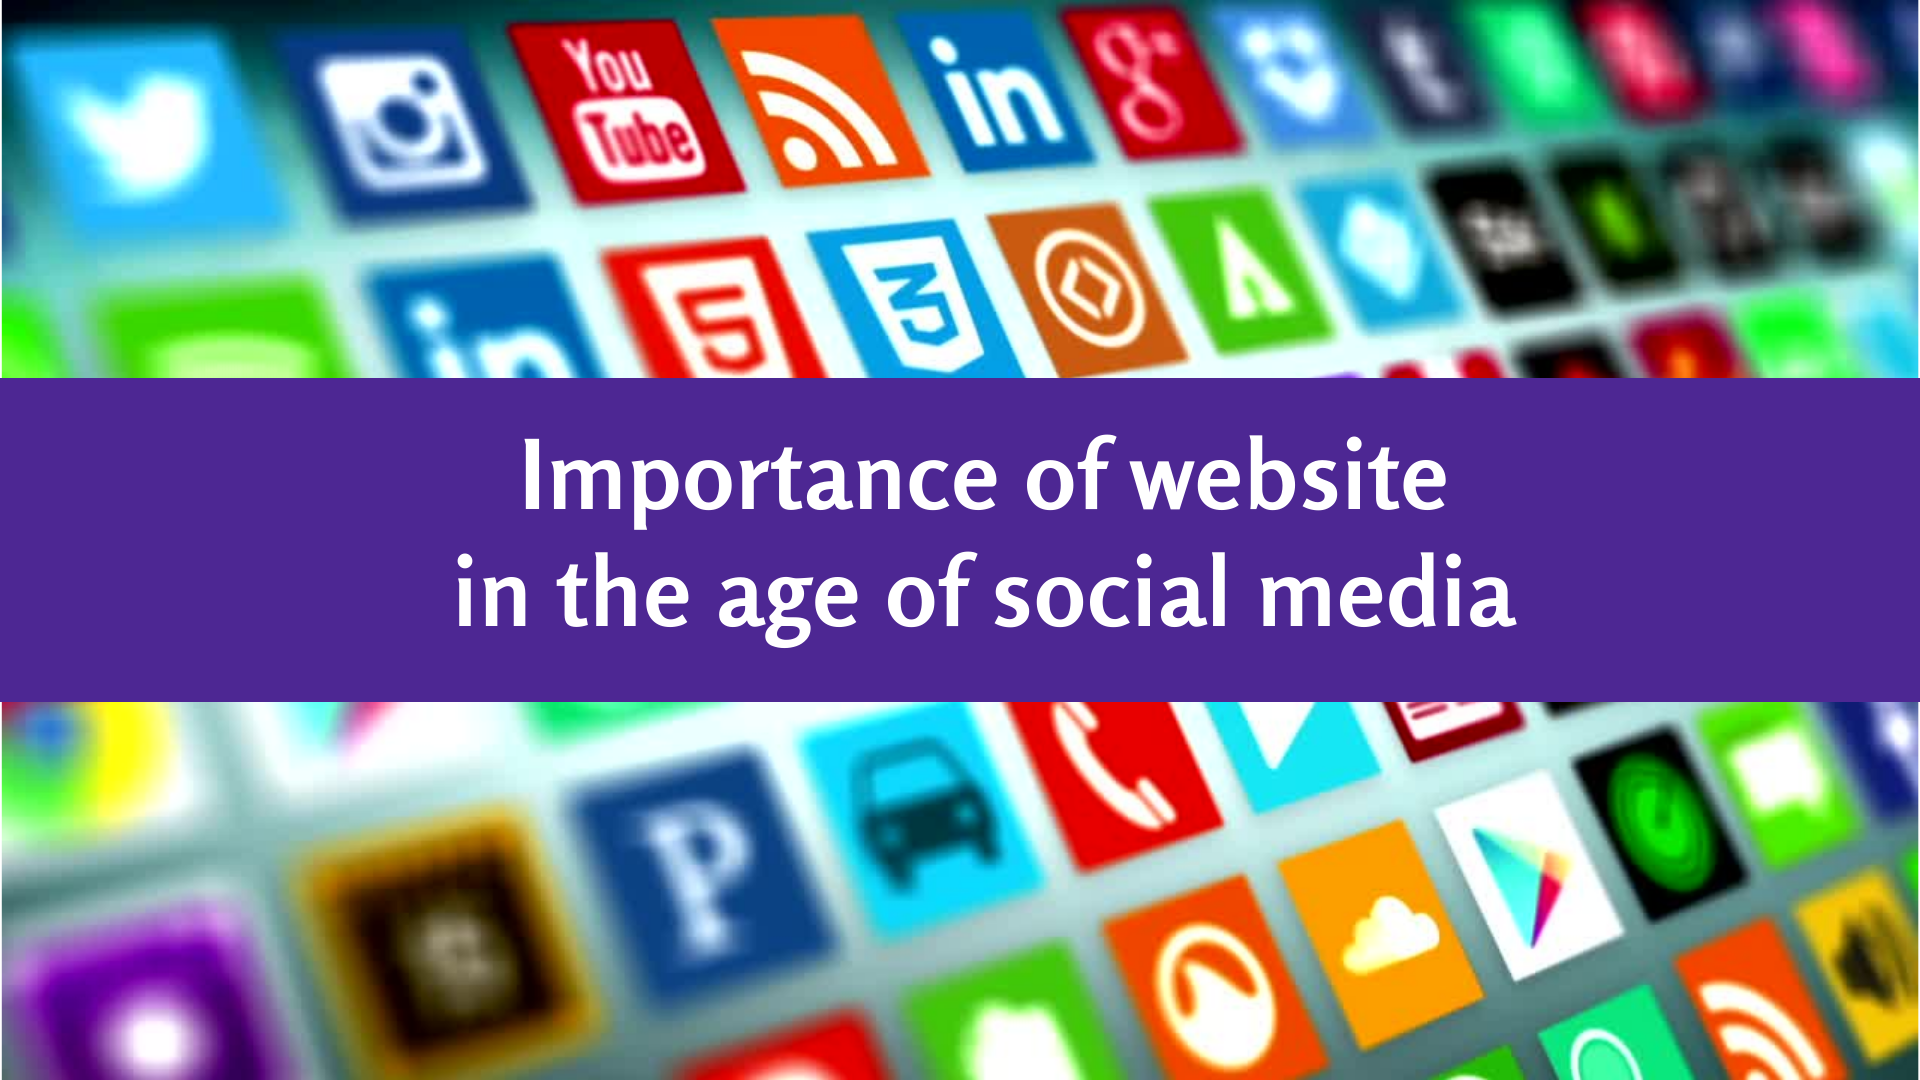 The importance of having a website in the age of Social media